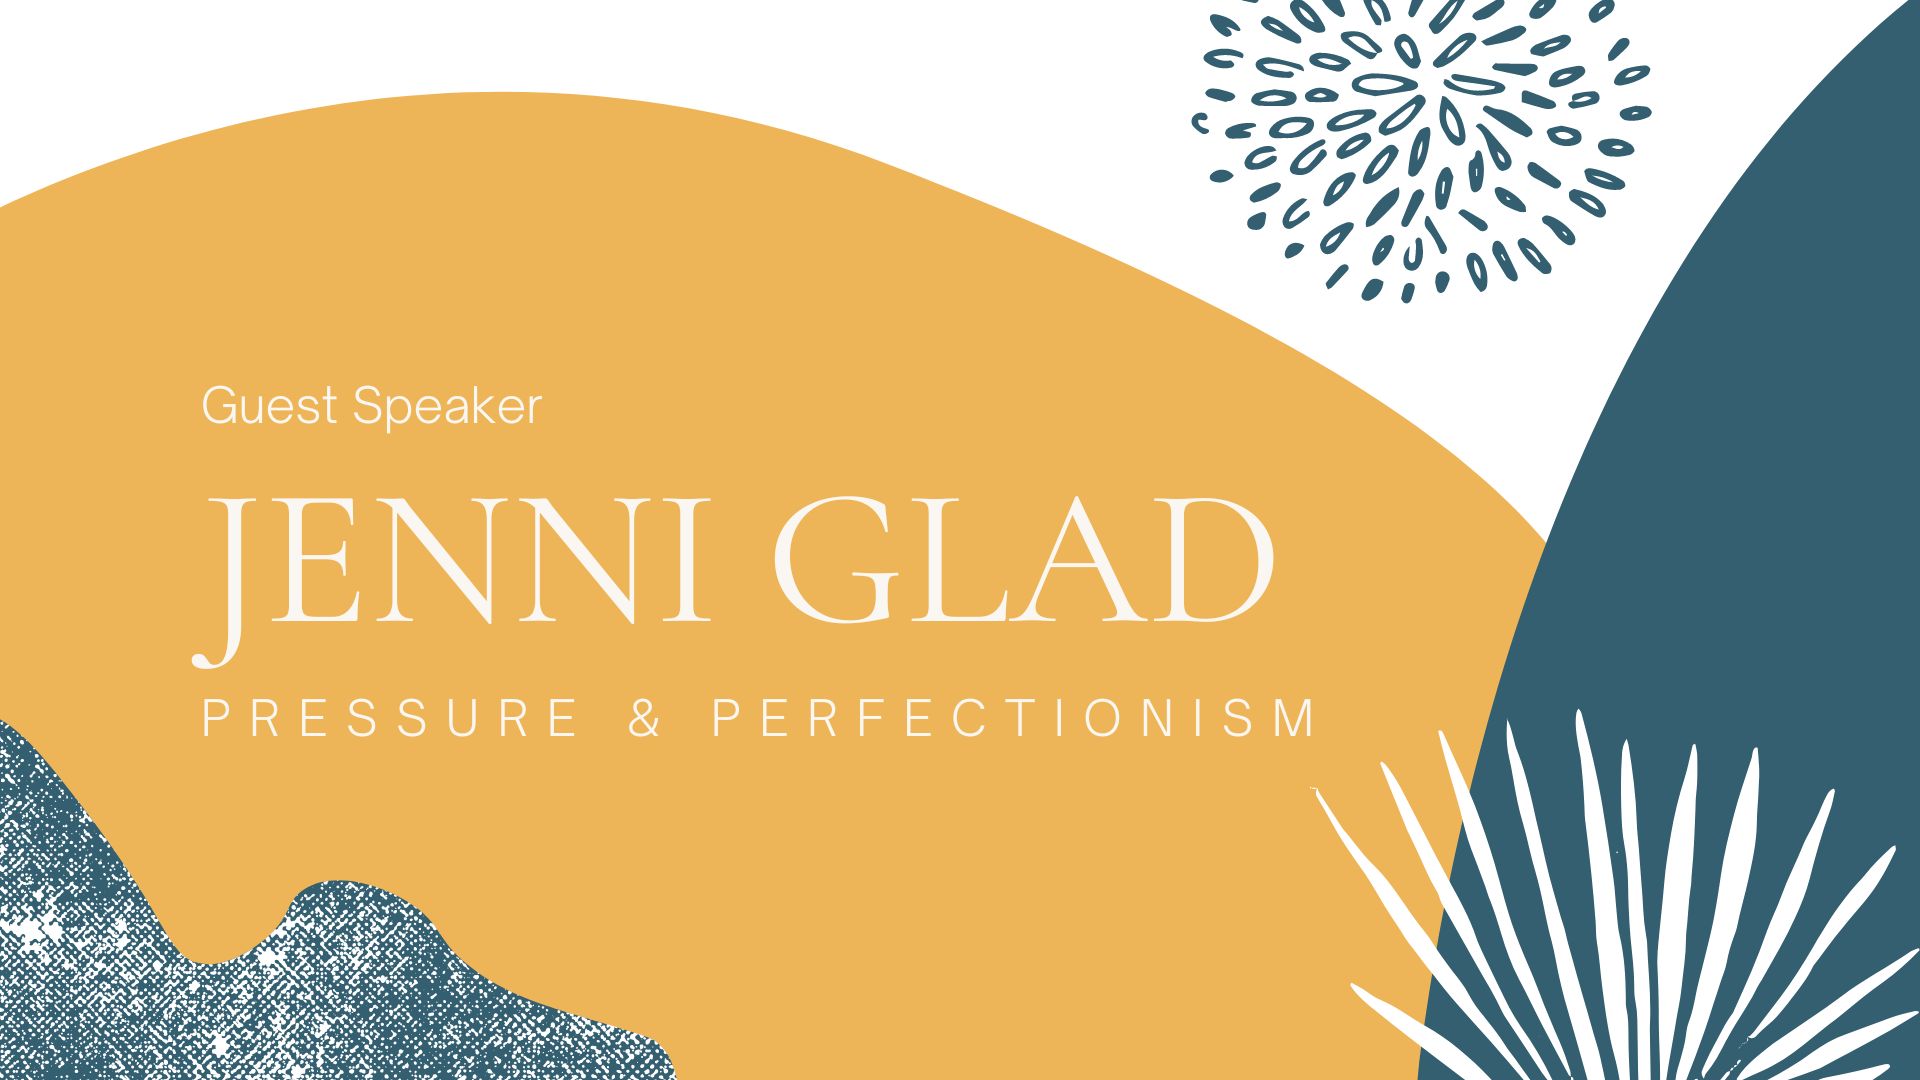 Pressure and Perfectionism with guest speaker Jenni Glad